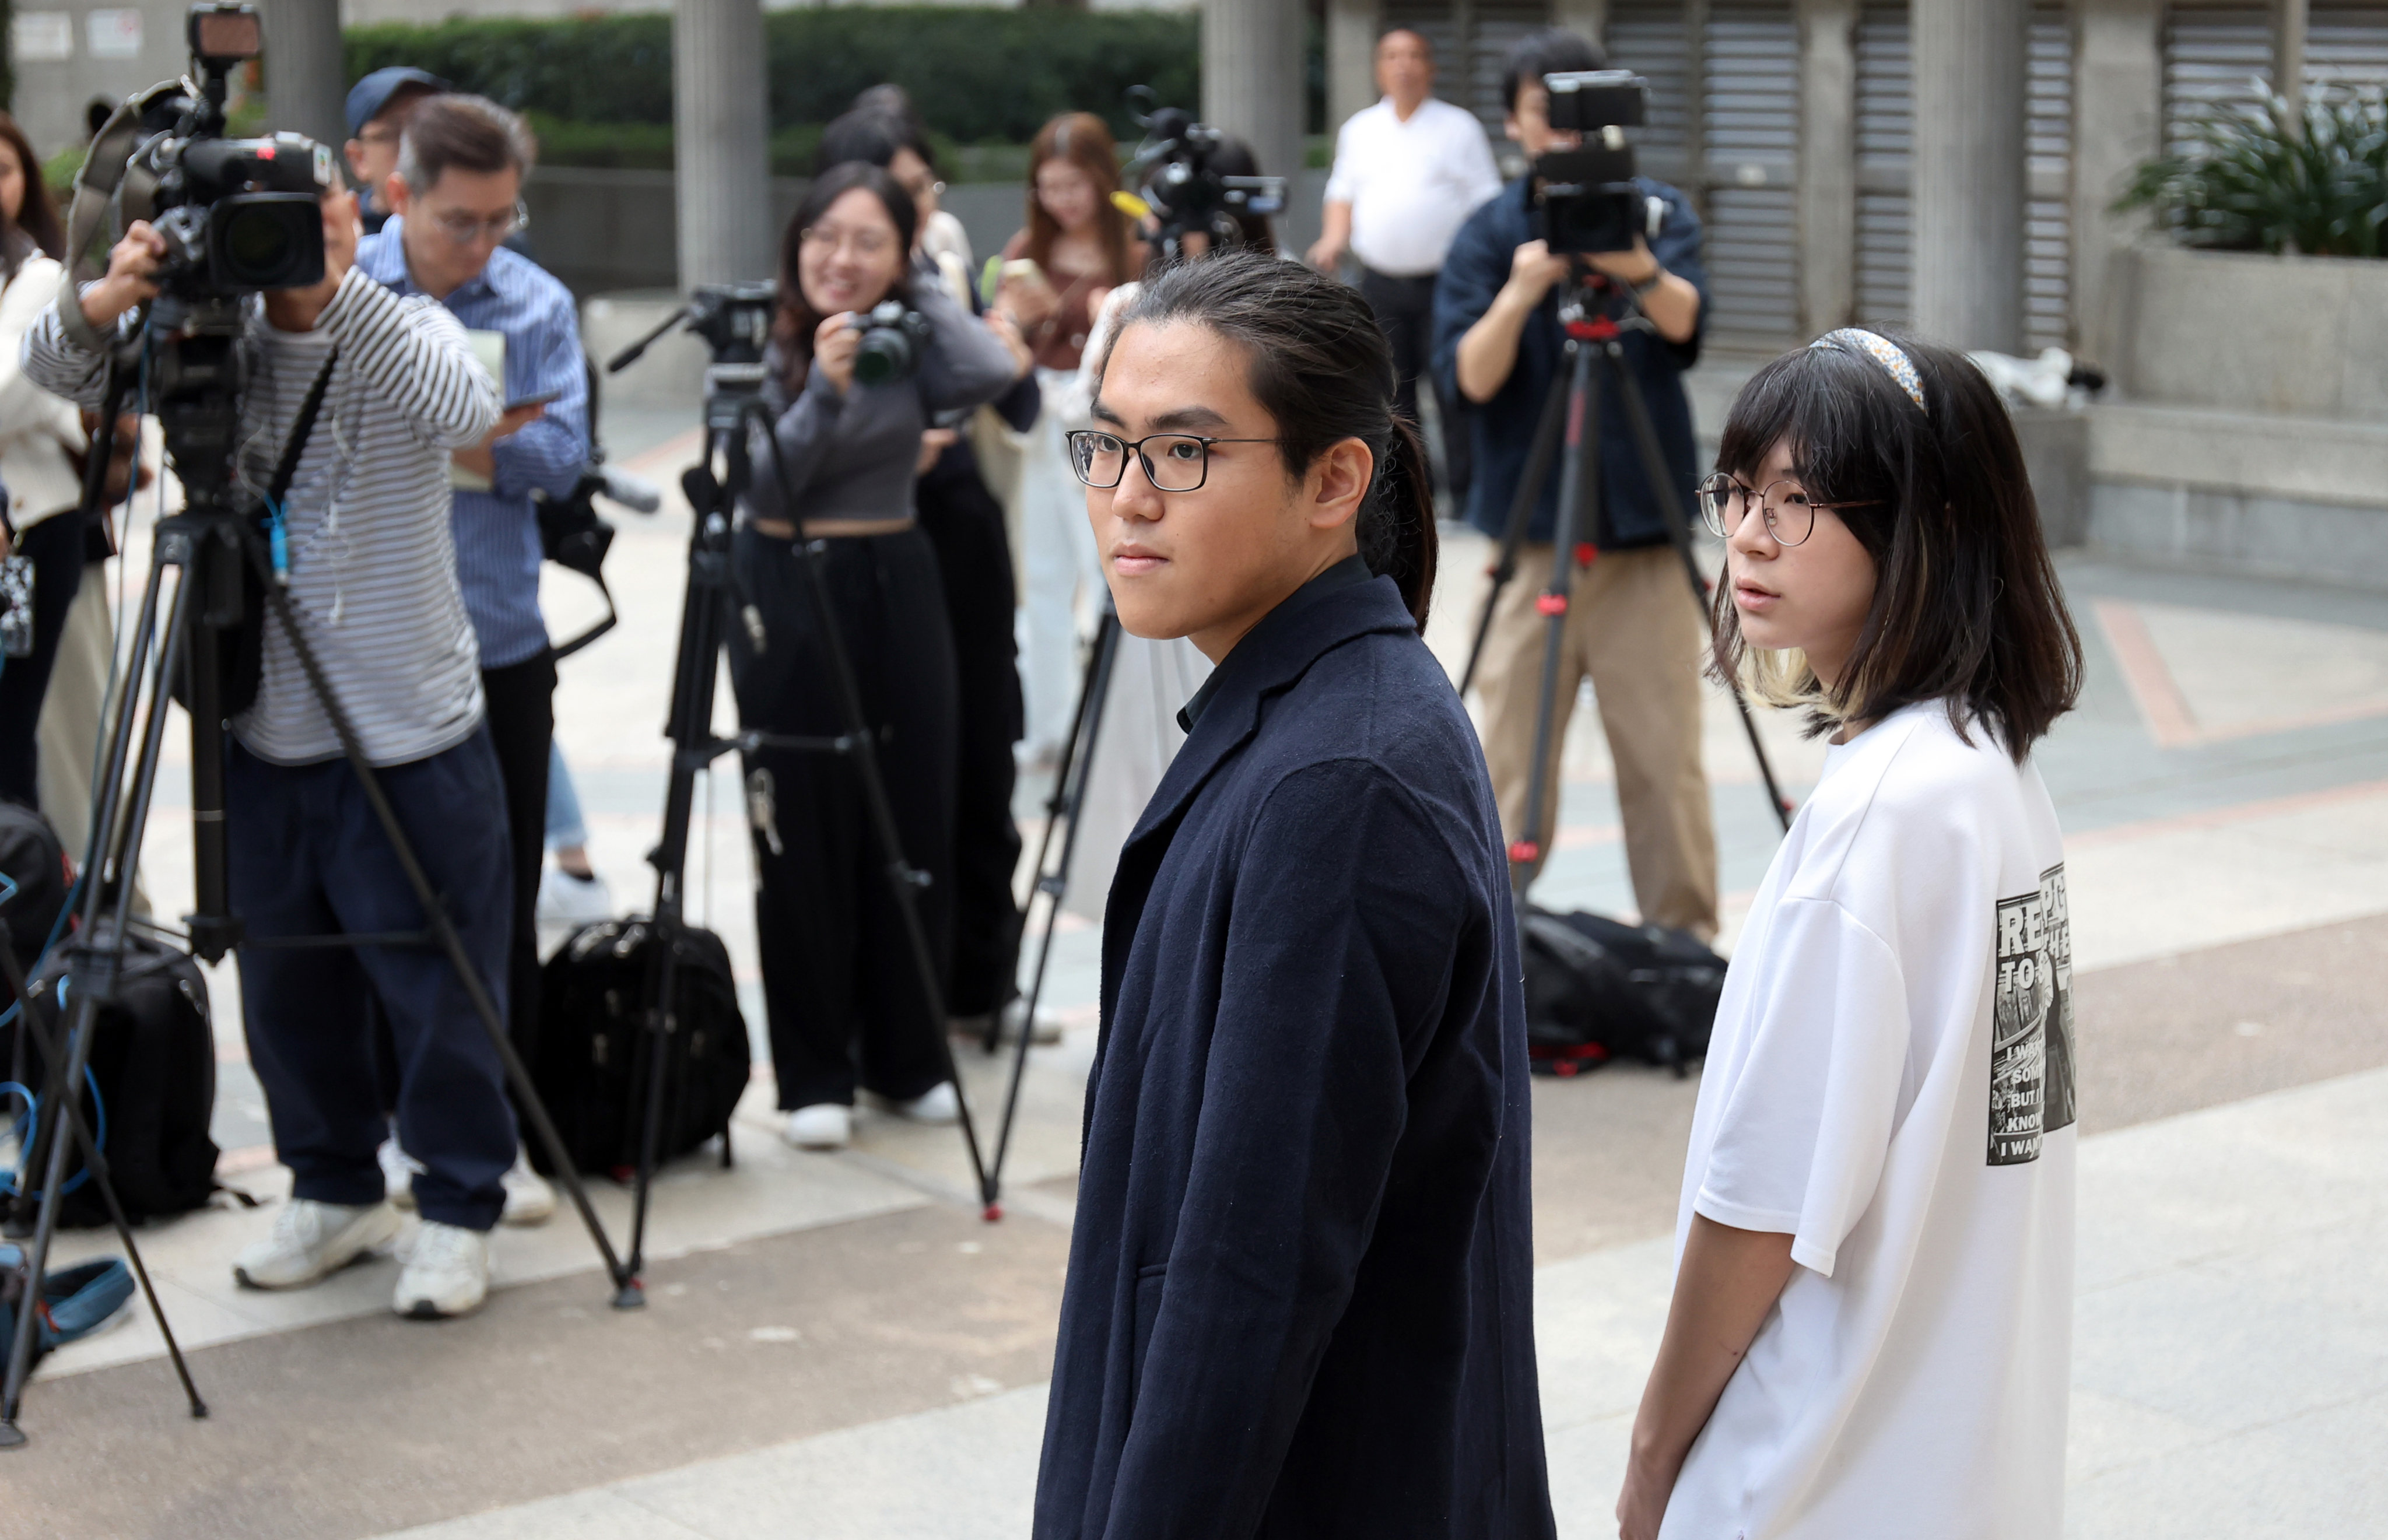 Ecarret Wong and Nathan Lam meet the media after filing their hair discrimination claims in Wan Chai. Photo: Edmond So